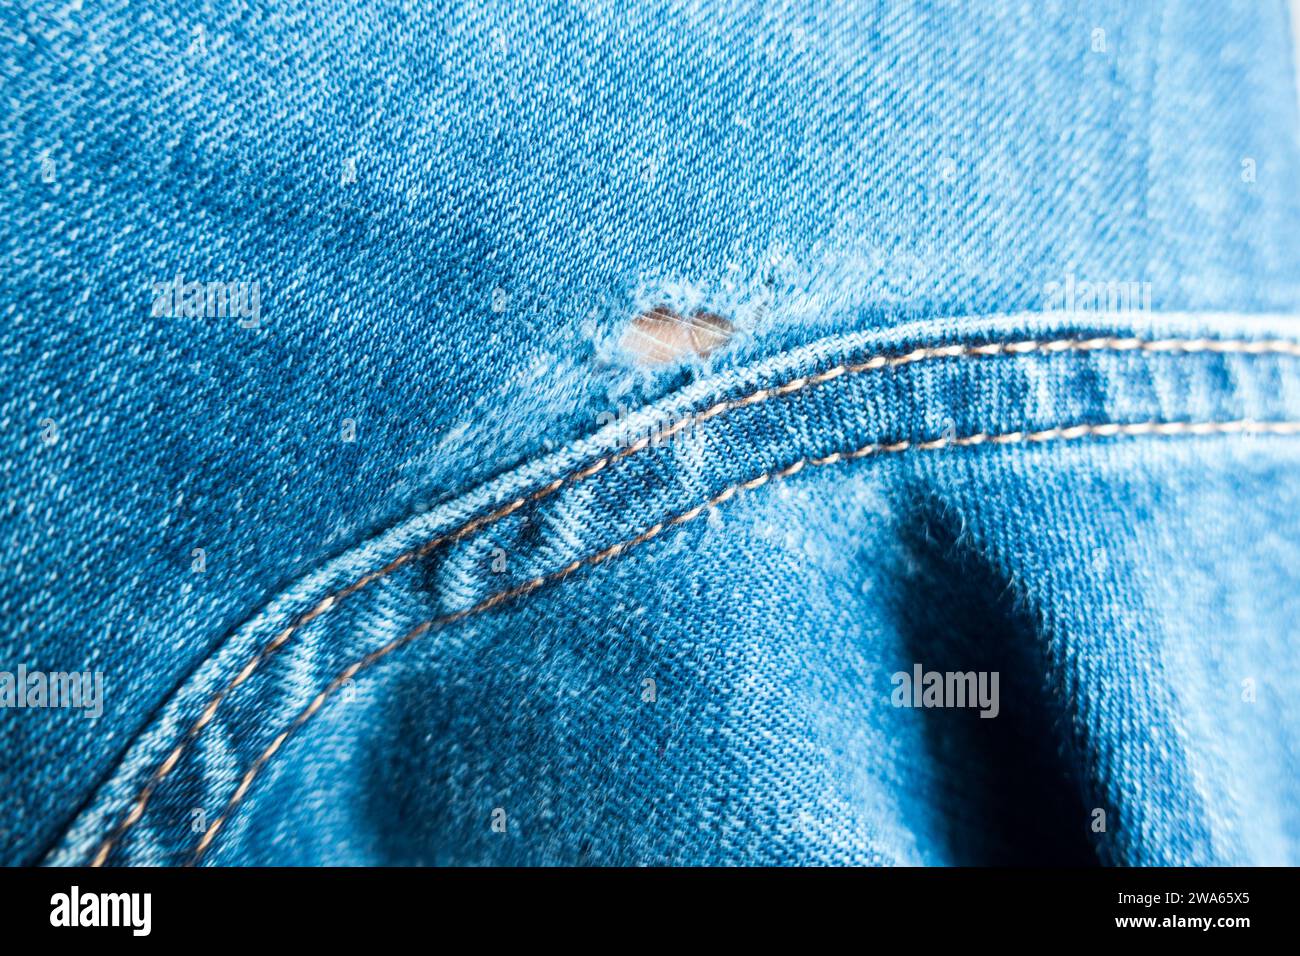 Worn out jeans ripped jeans Stock Photo